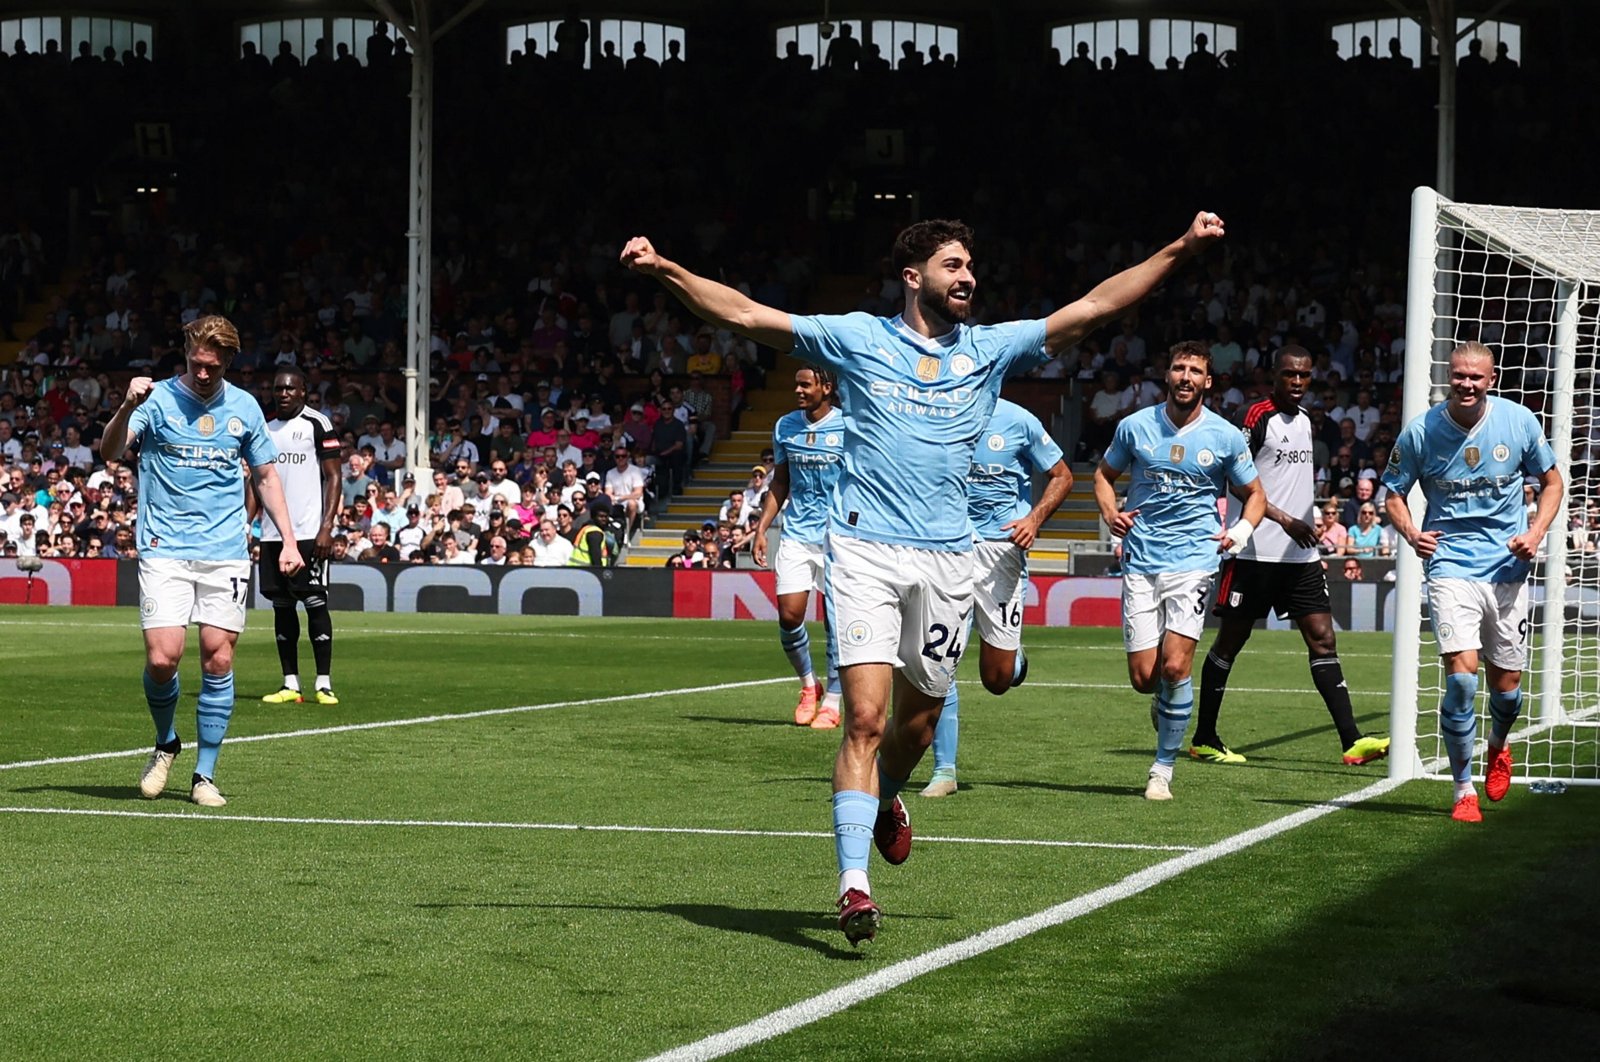 Champions City all but seal 4th consecutive Premier League title